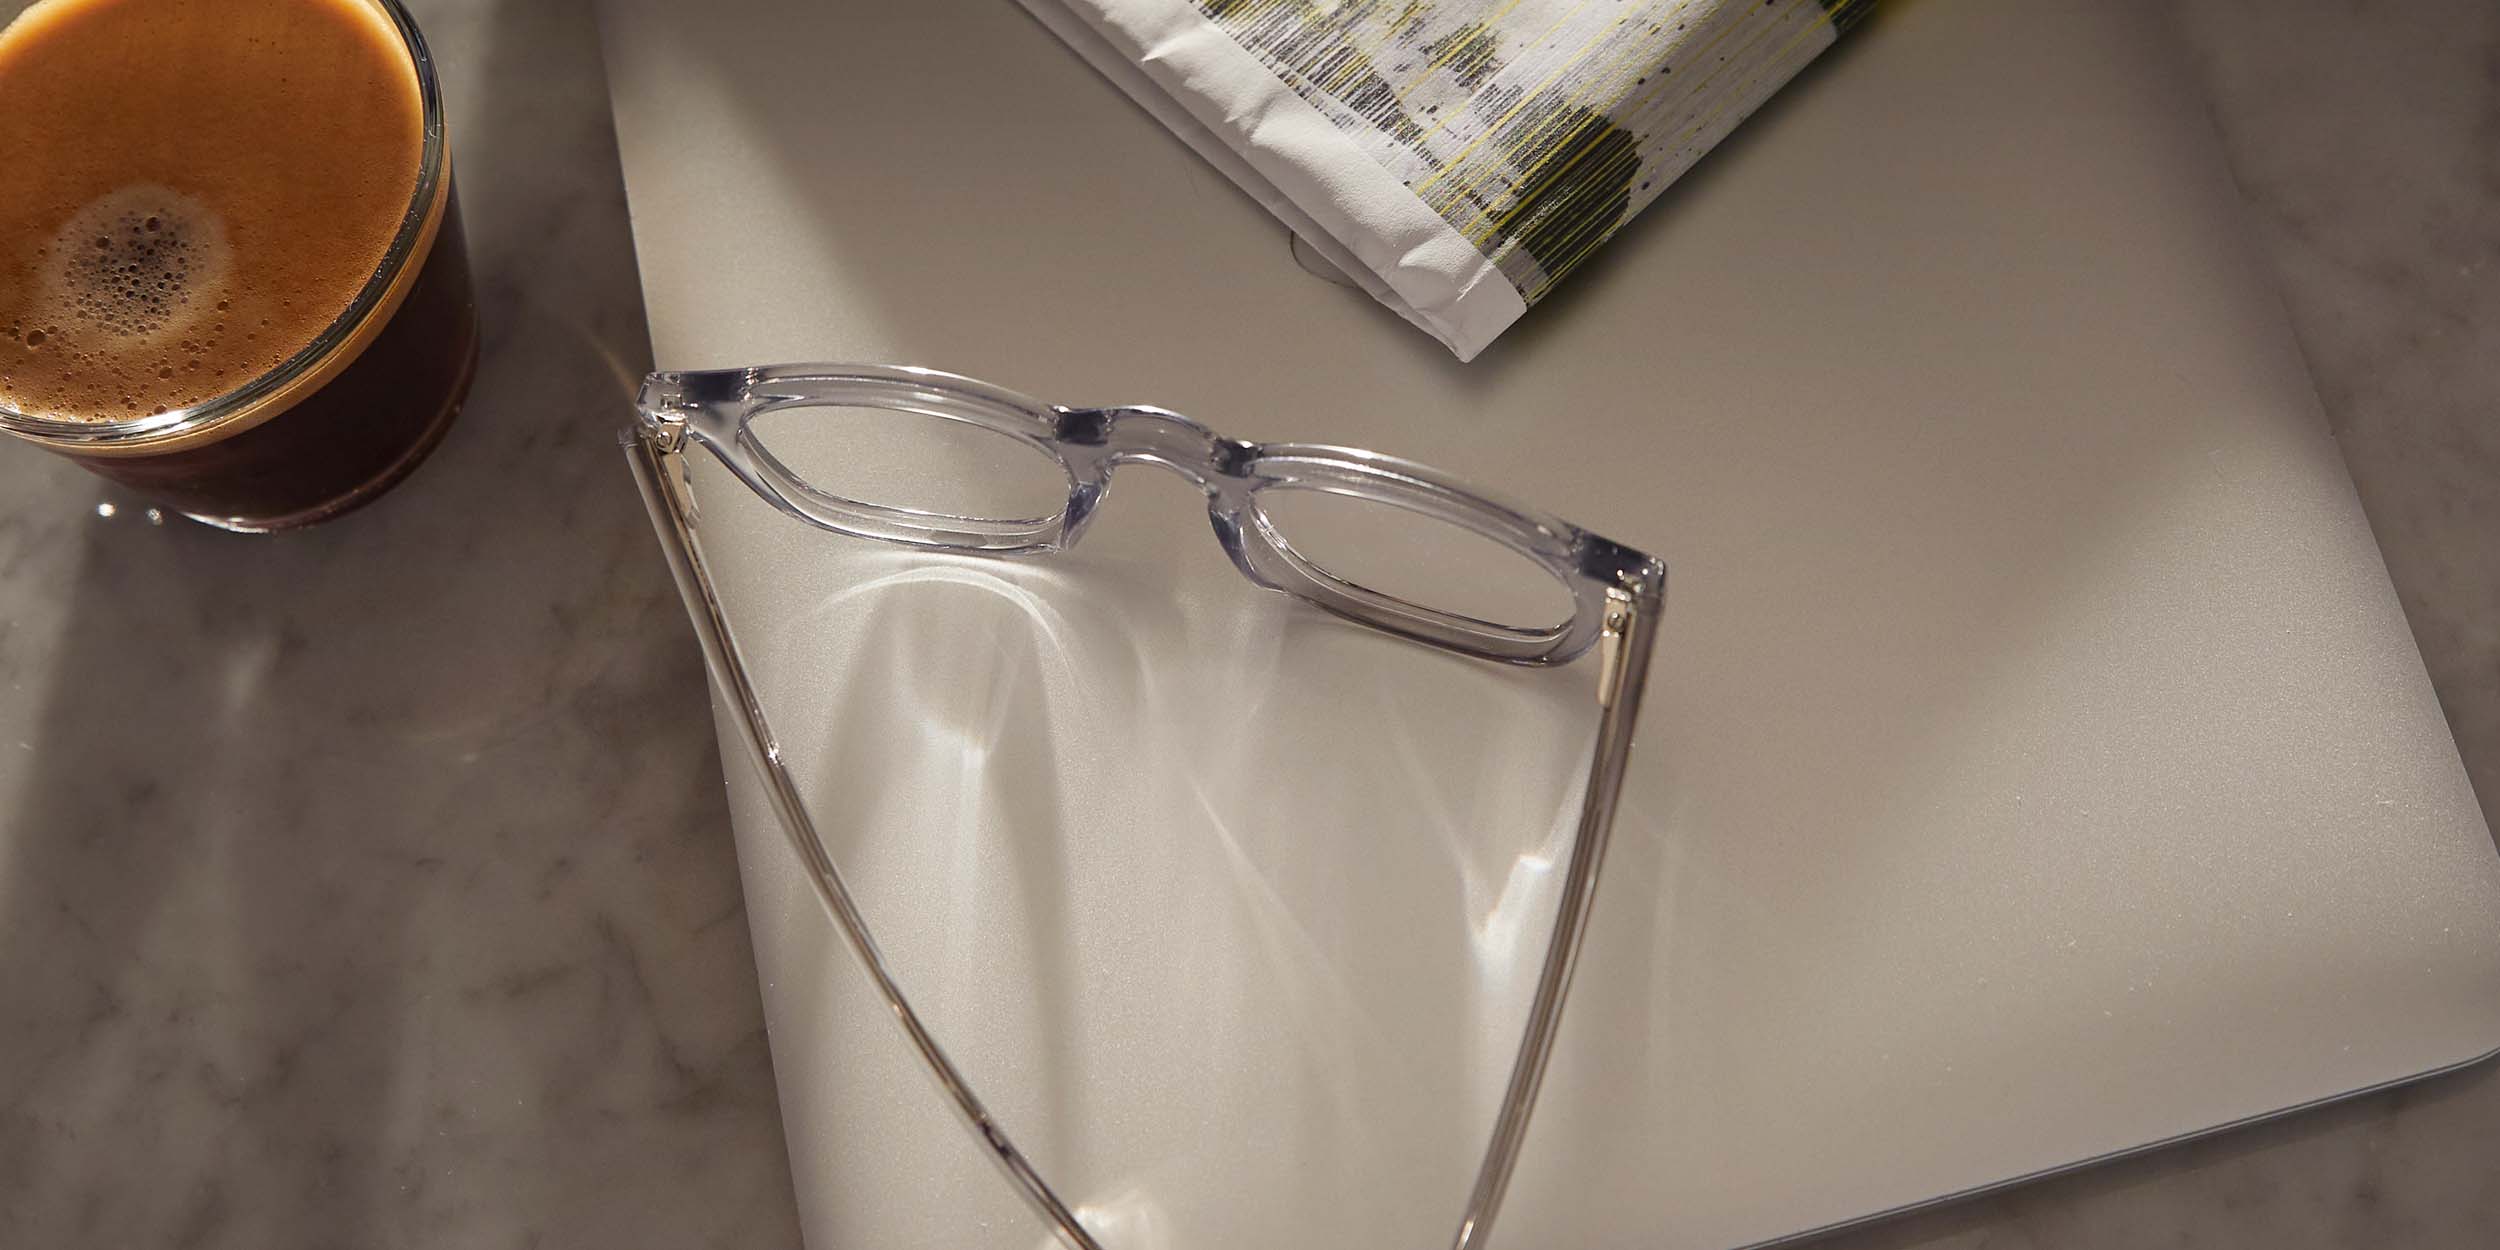 Photo Details of Thomas Clear Grey Reading Glasses in a room